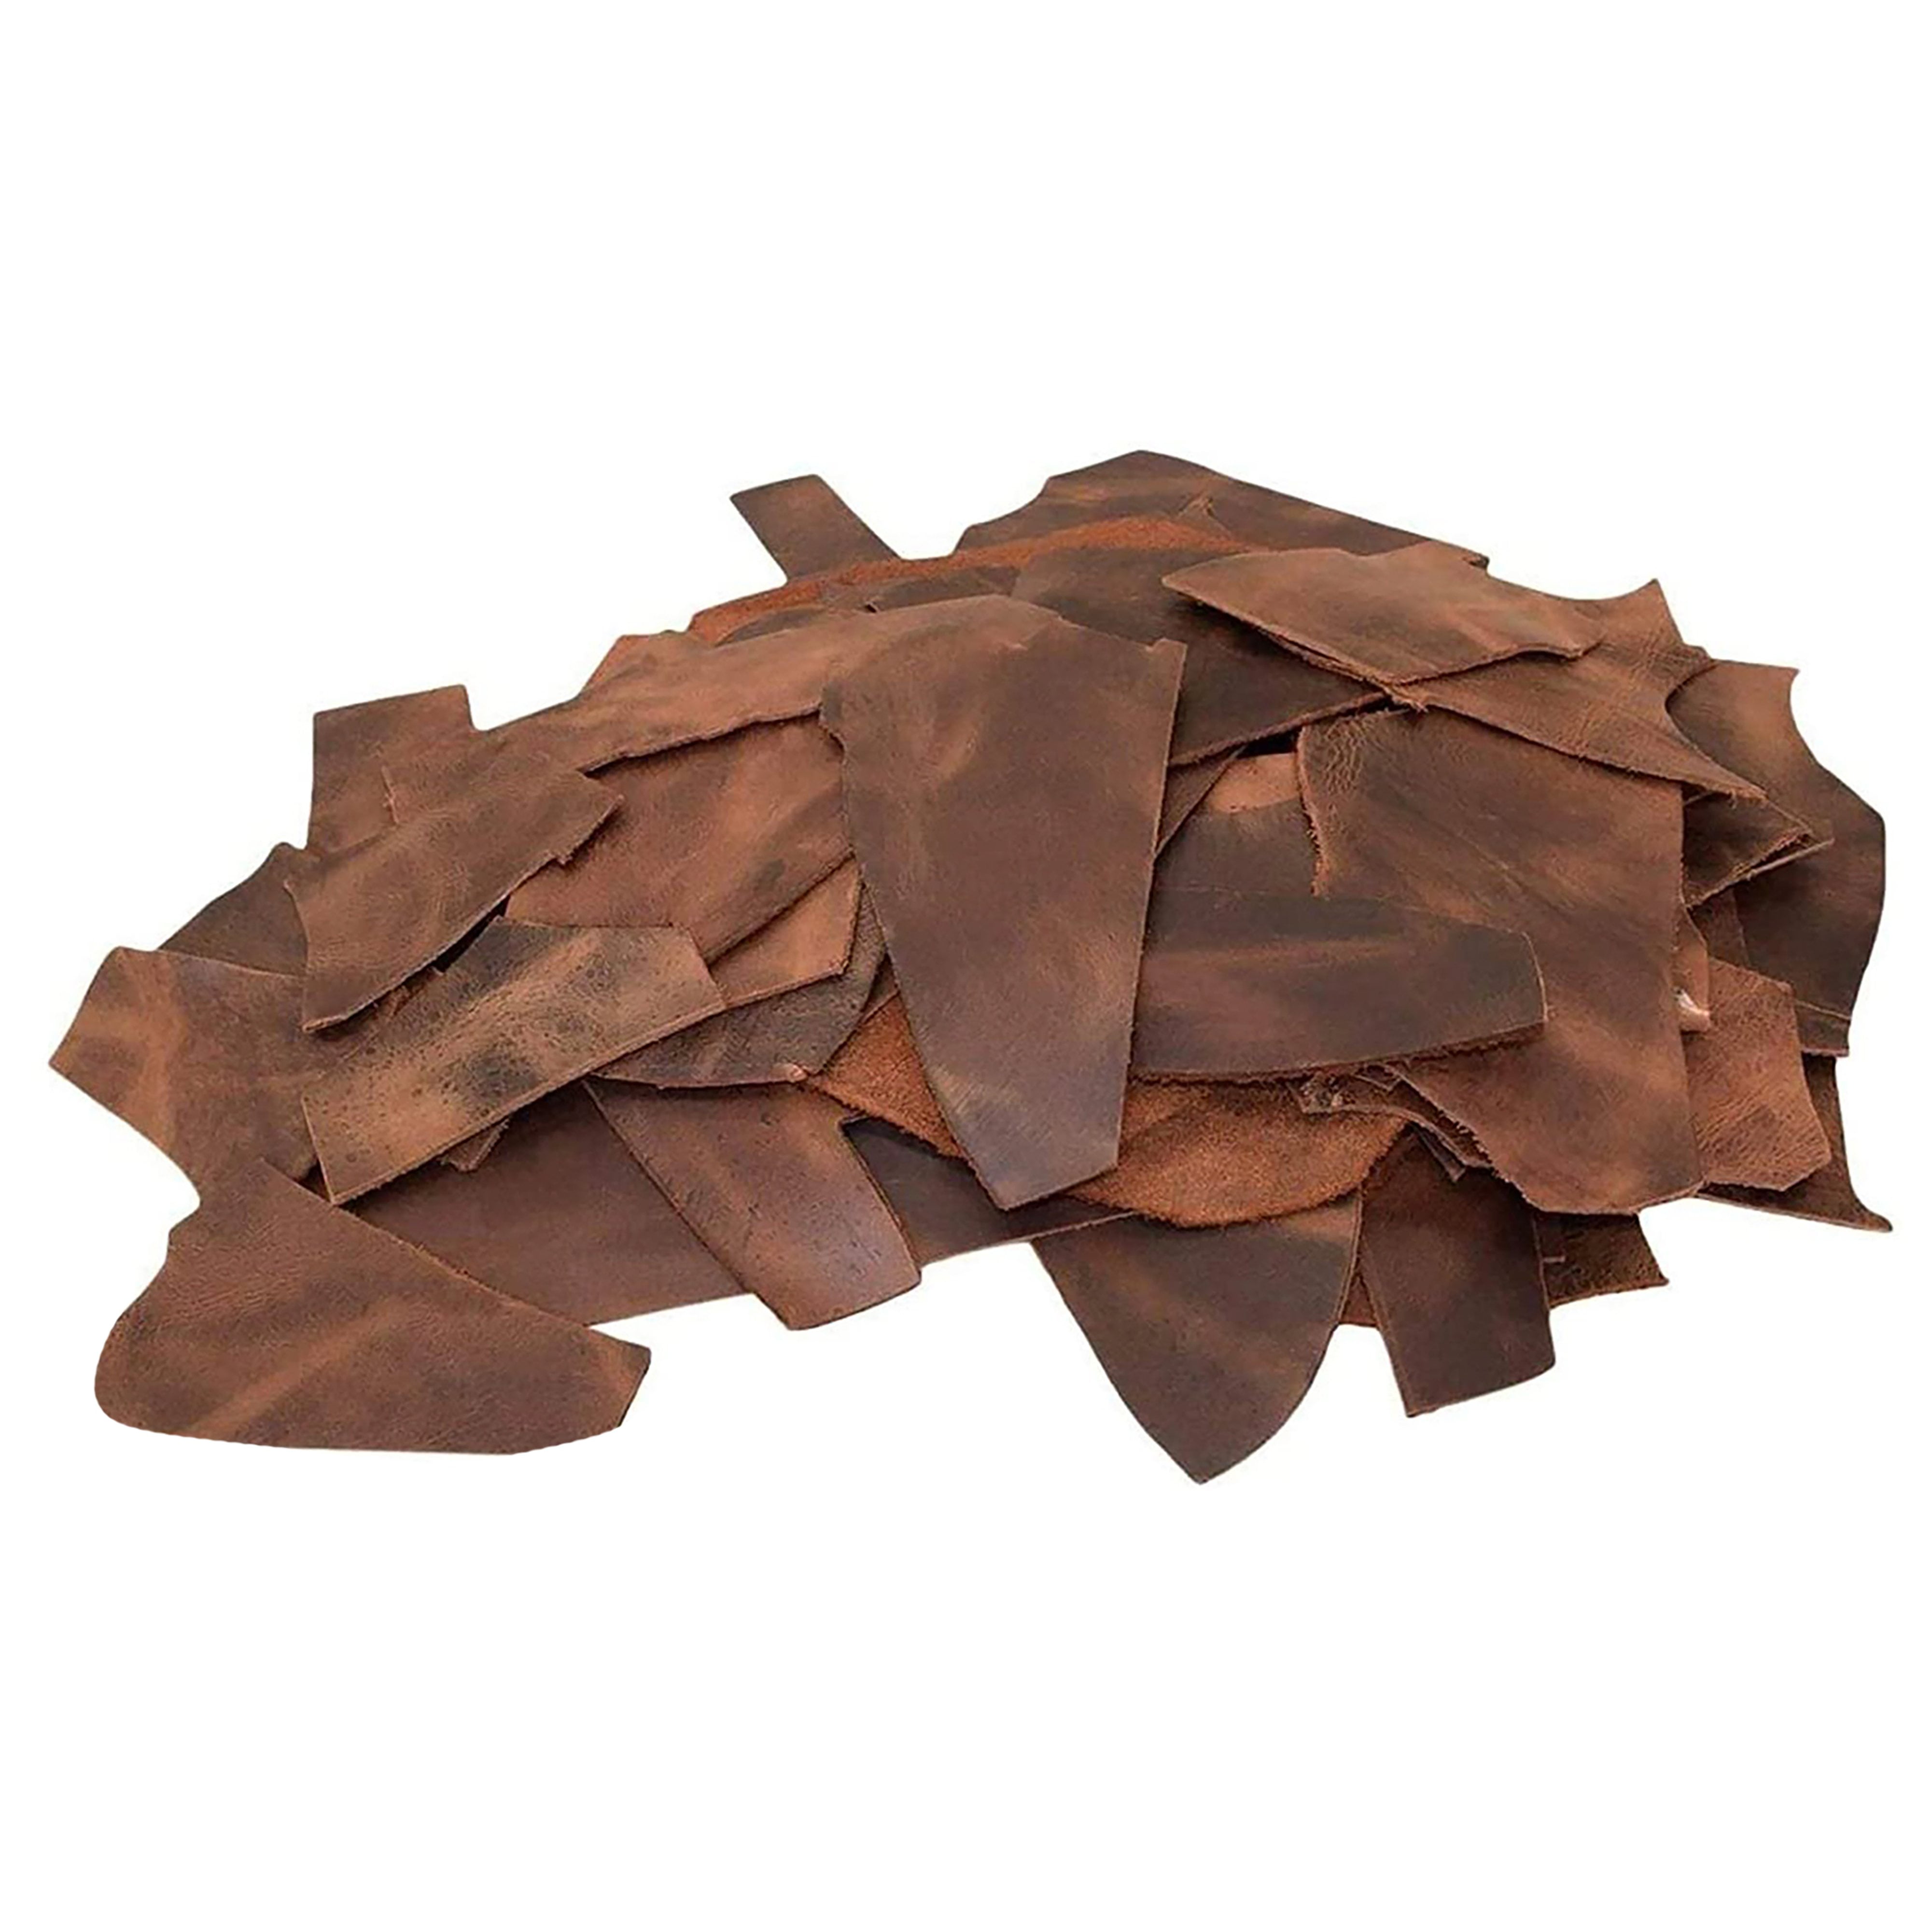 Leather Scraps for Crafts